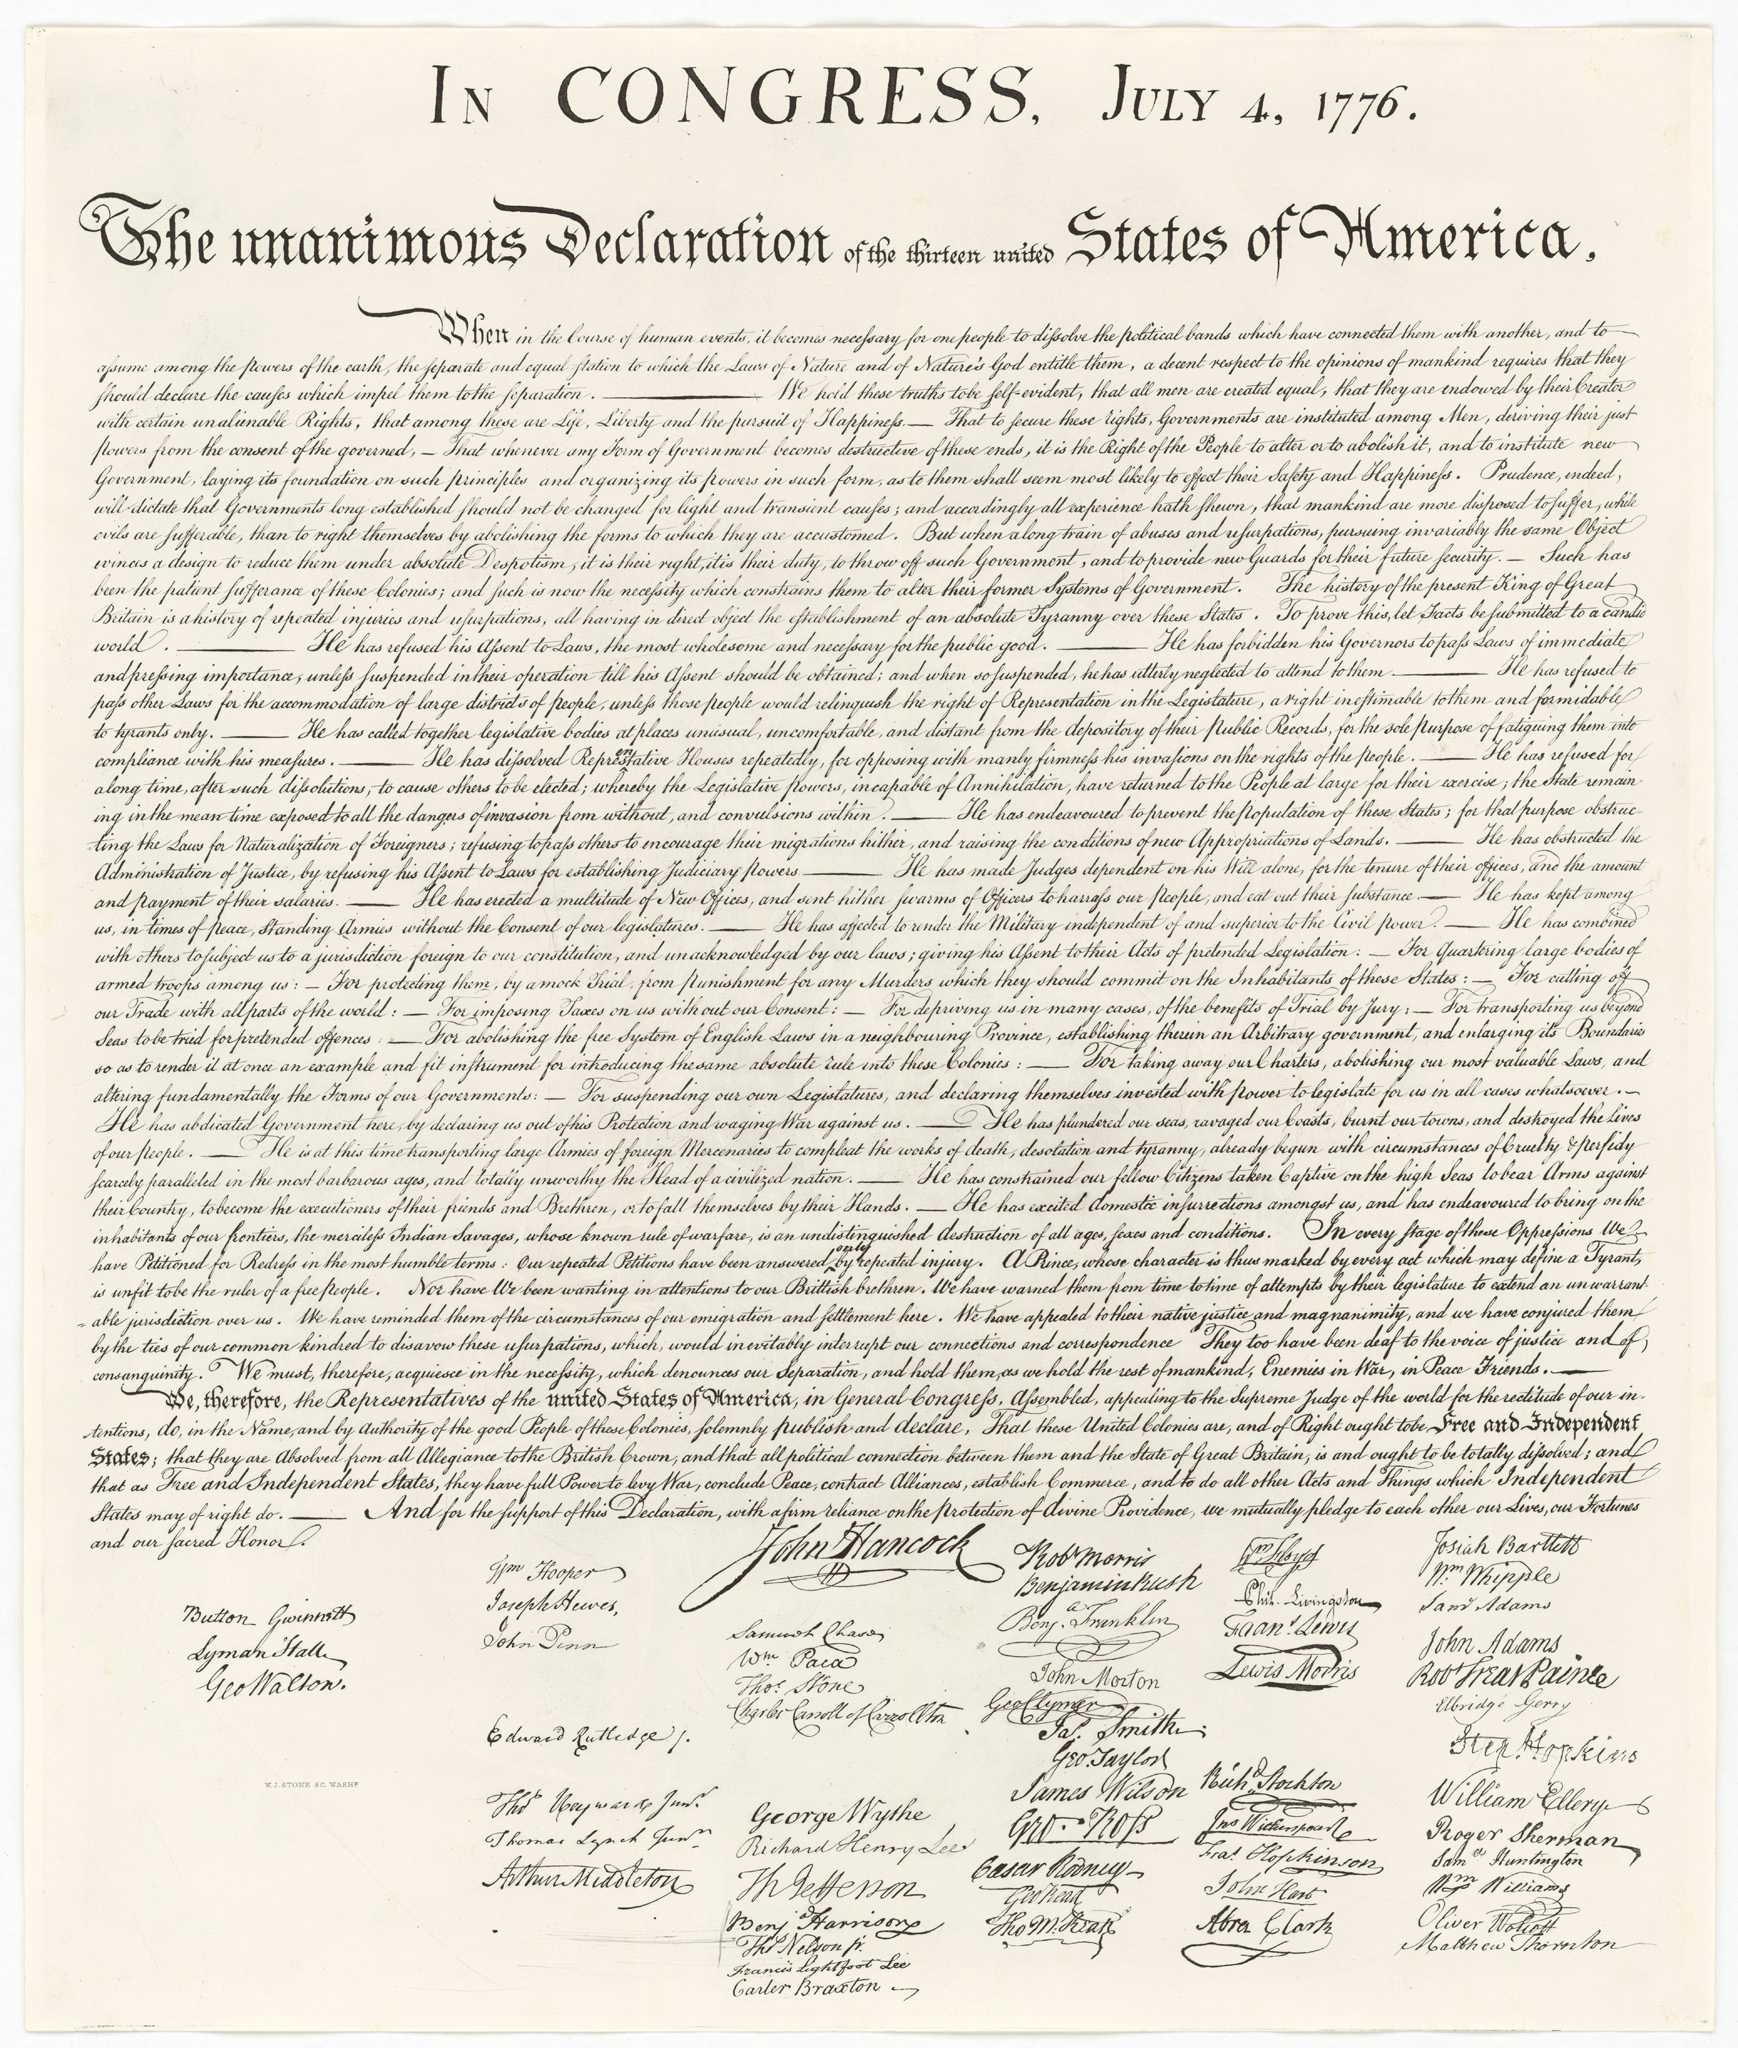 Declaration of Independence, 1776.